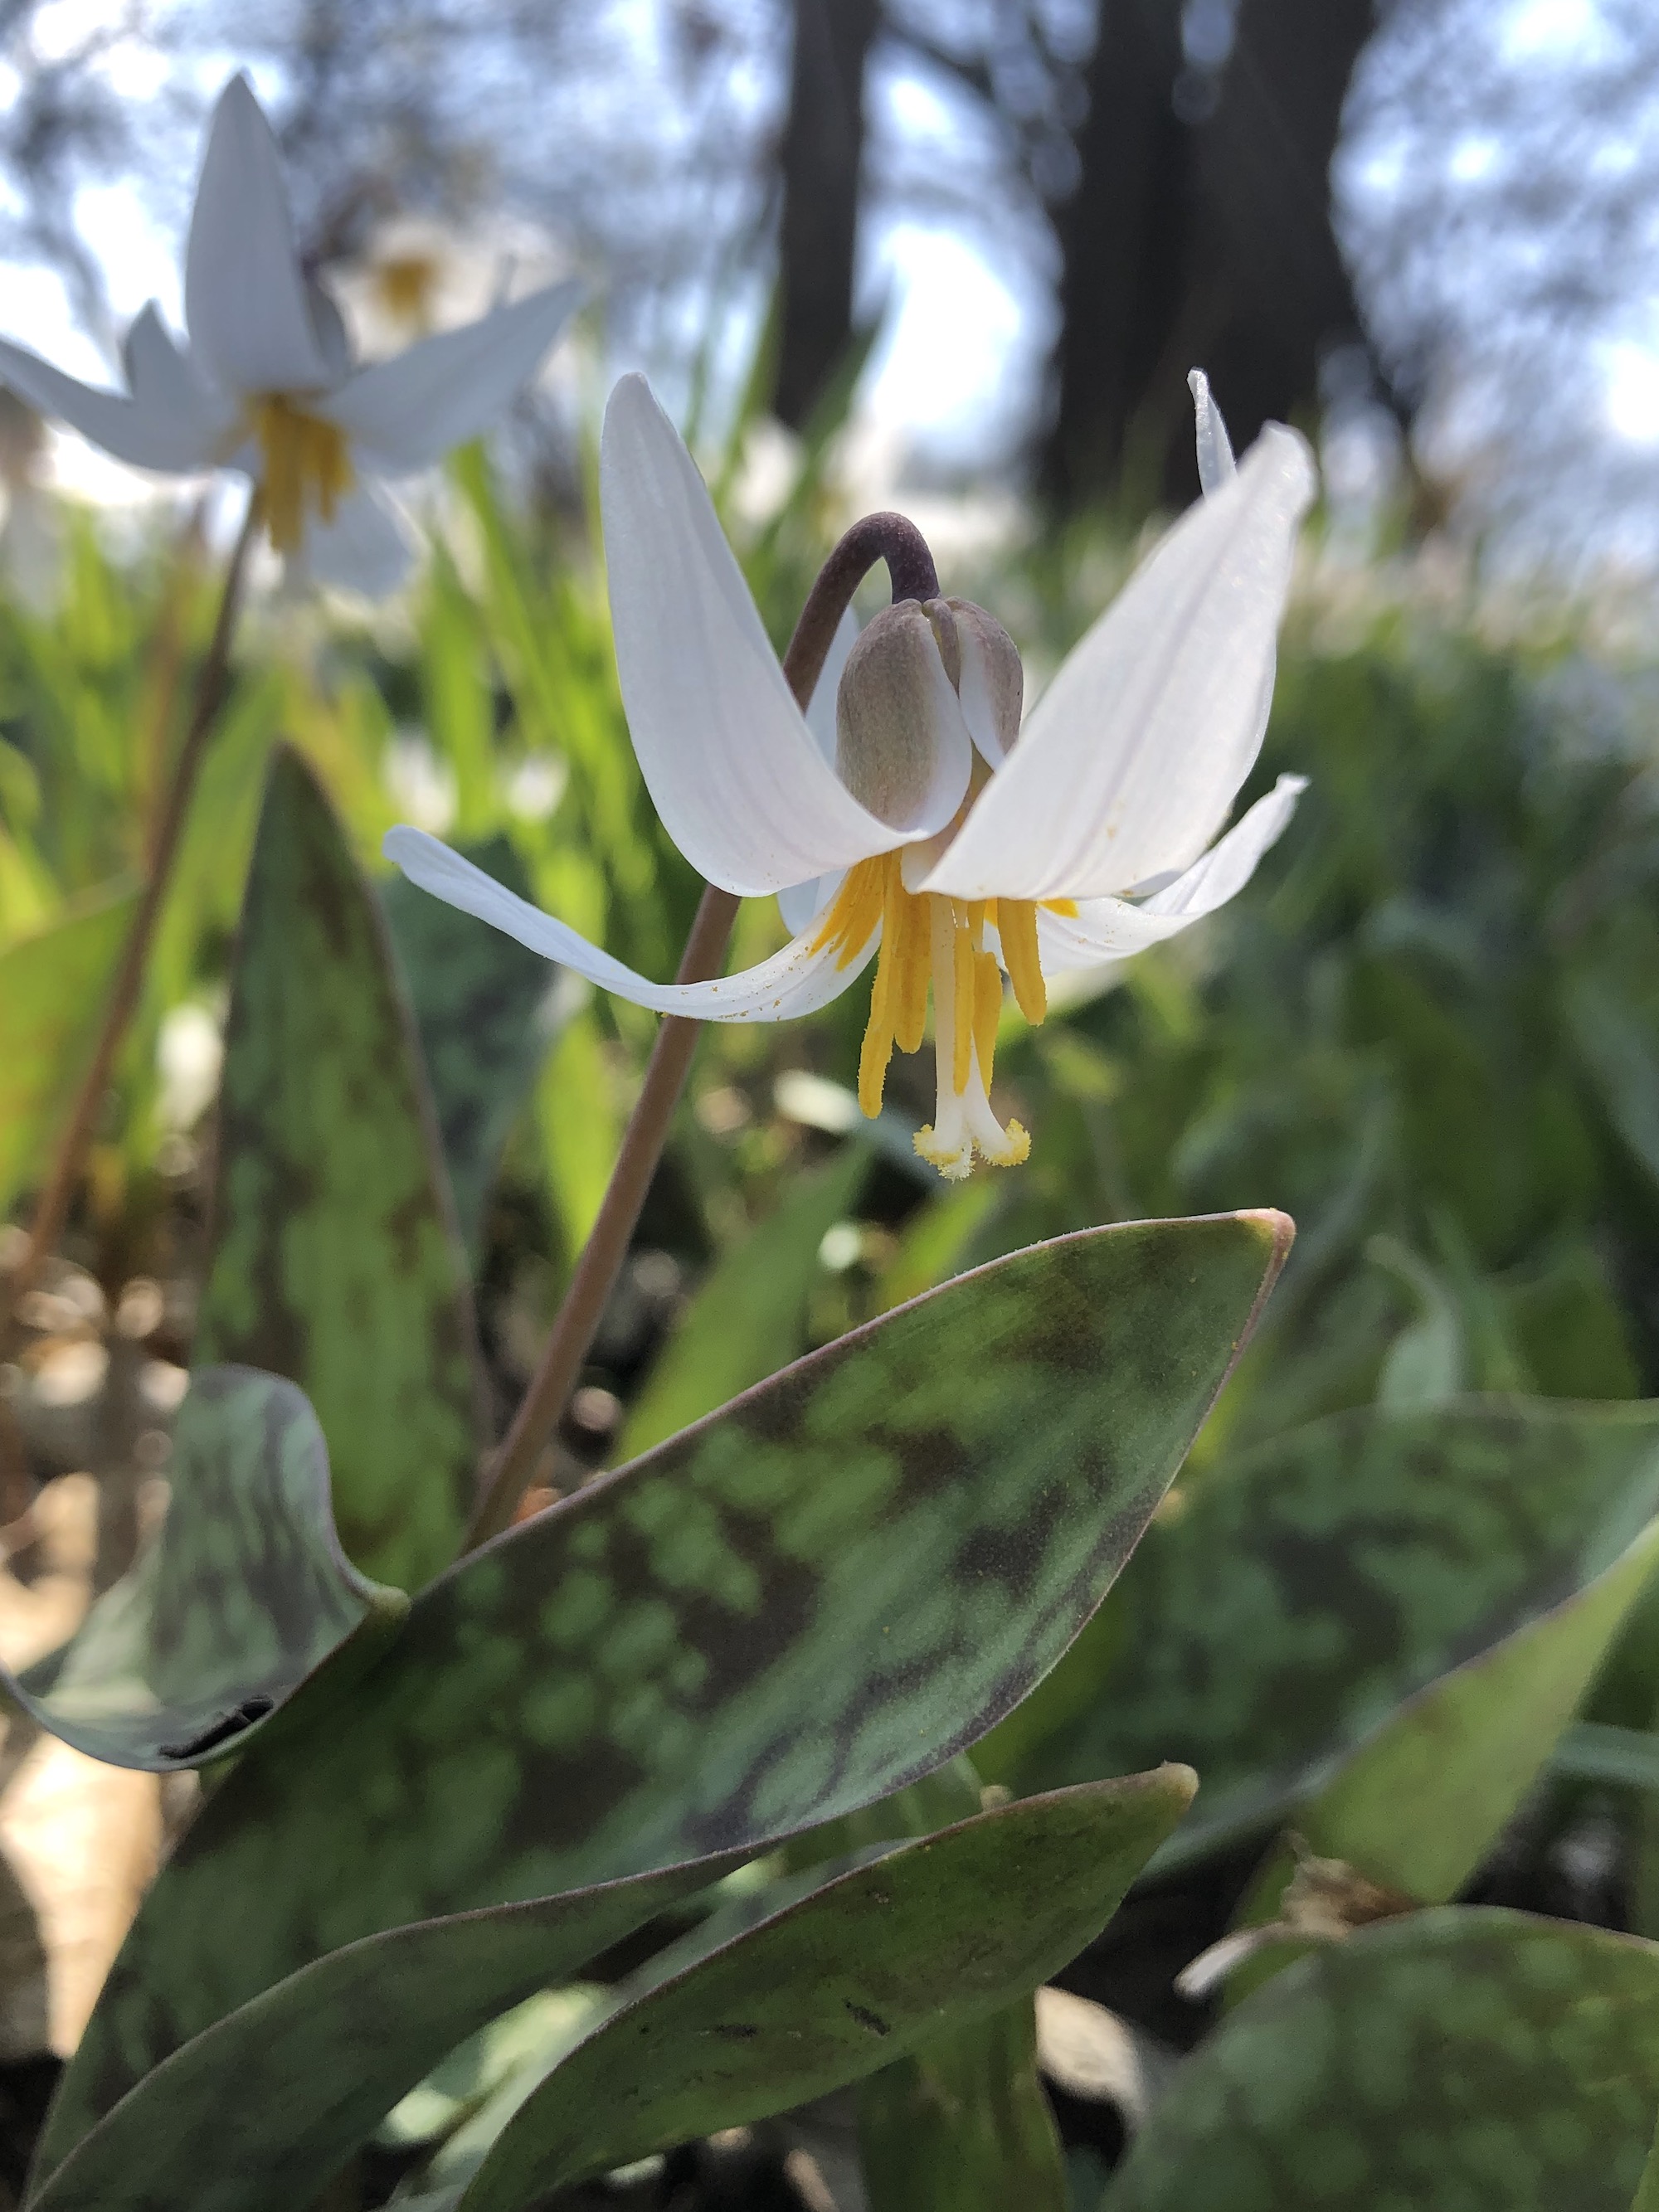 Trout Lily in Oak Savanna near Council Ring in Madison, Wisconsin on April 22, 2021.